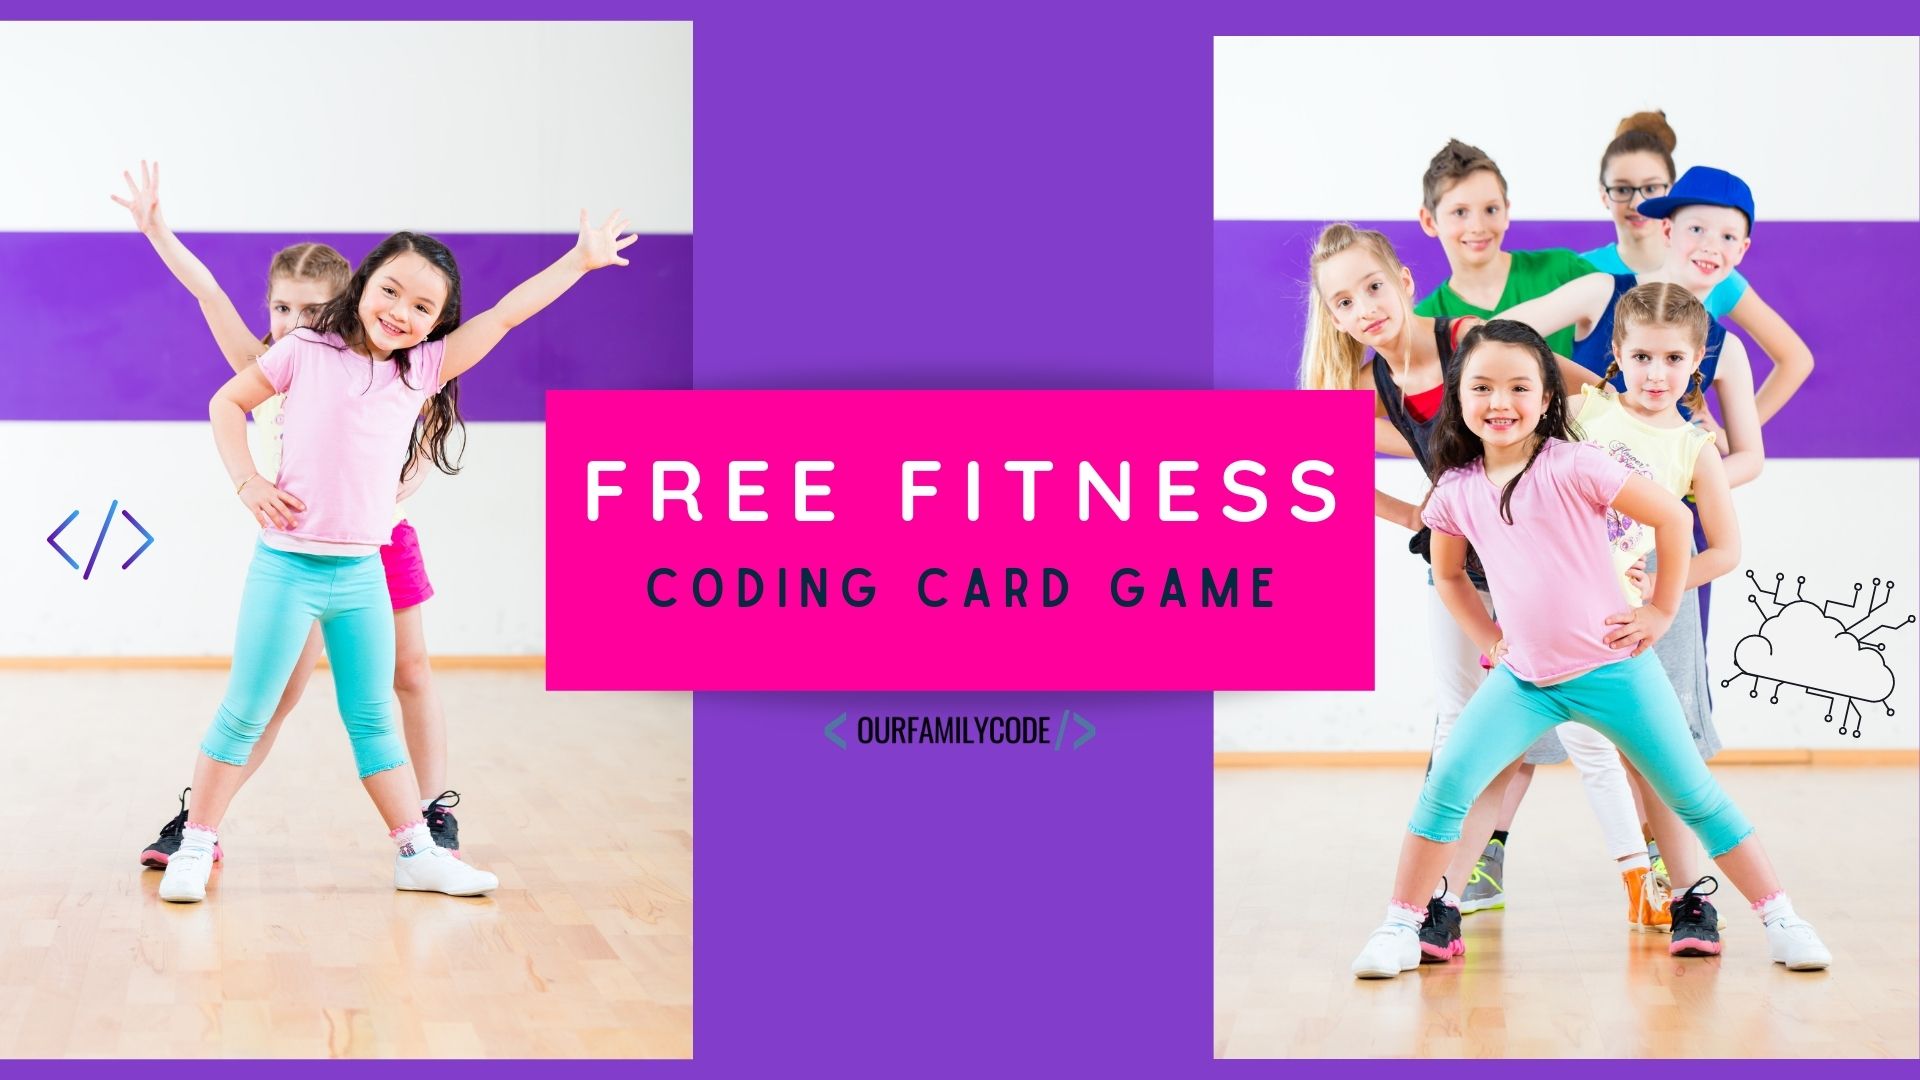 BH FB Free Fitness coding card game